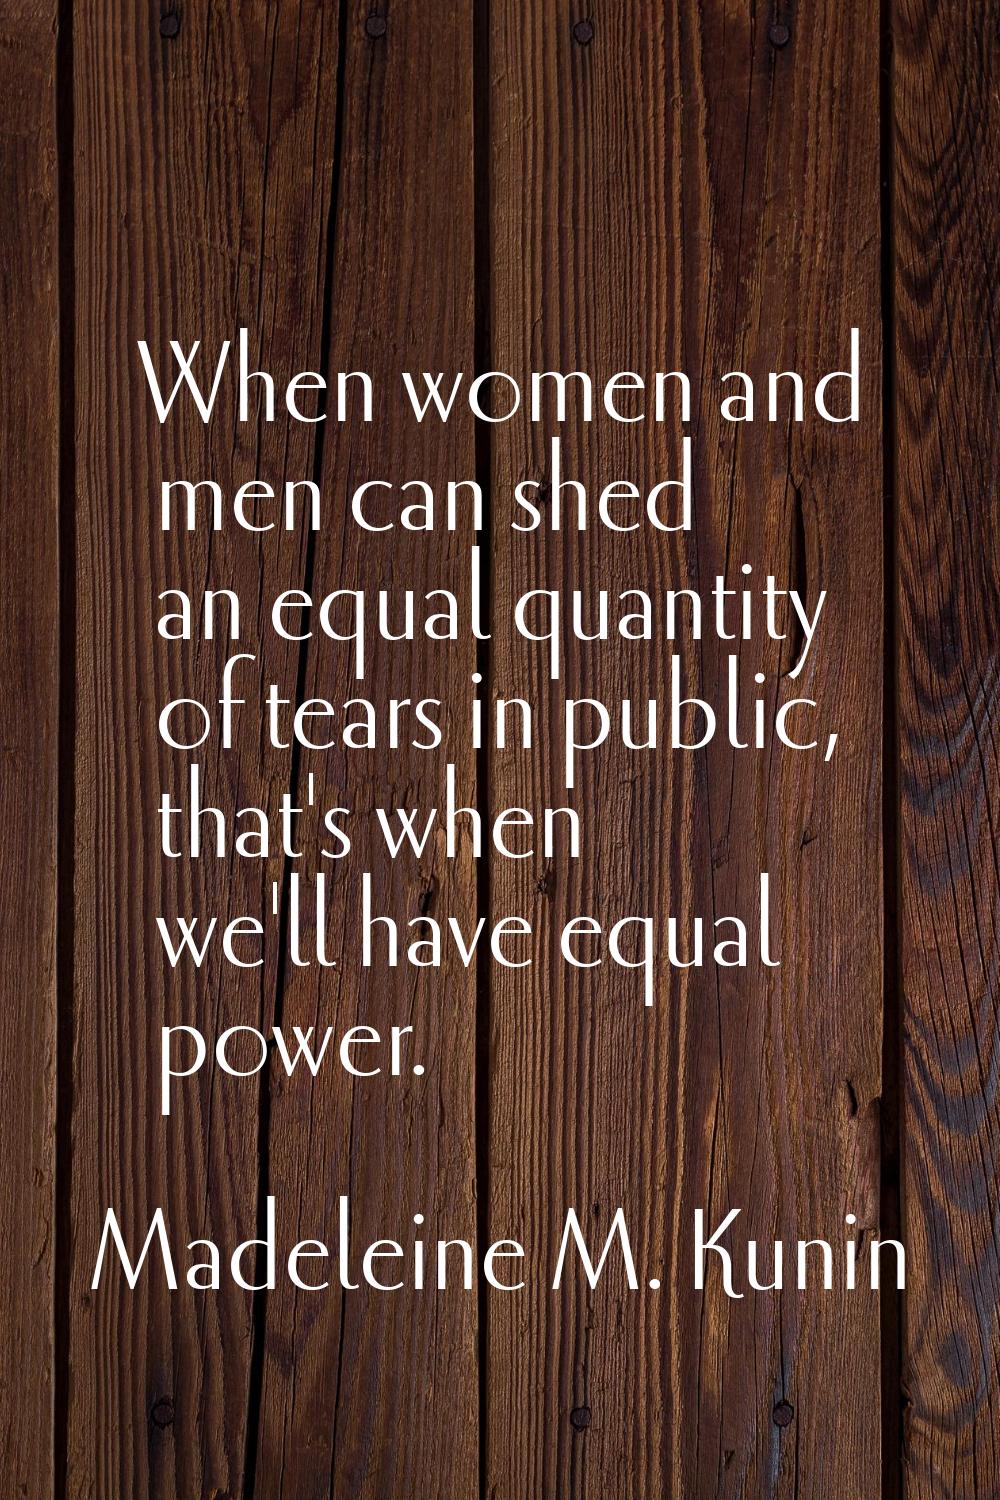 When women and men can shed an equal quantity of tears in public, that's when we'll have equal powe